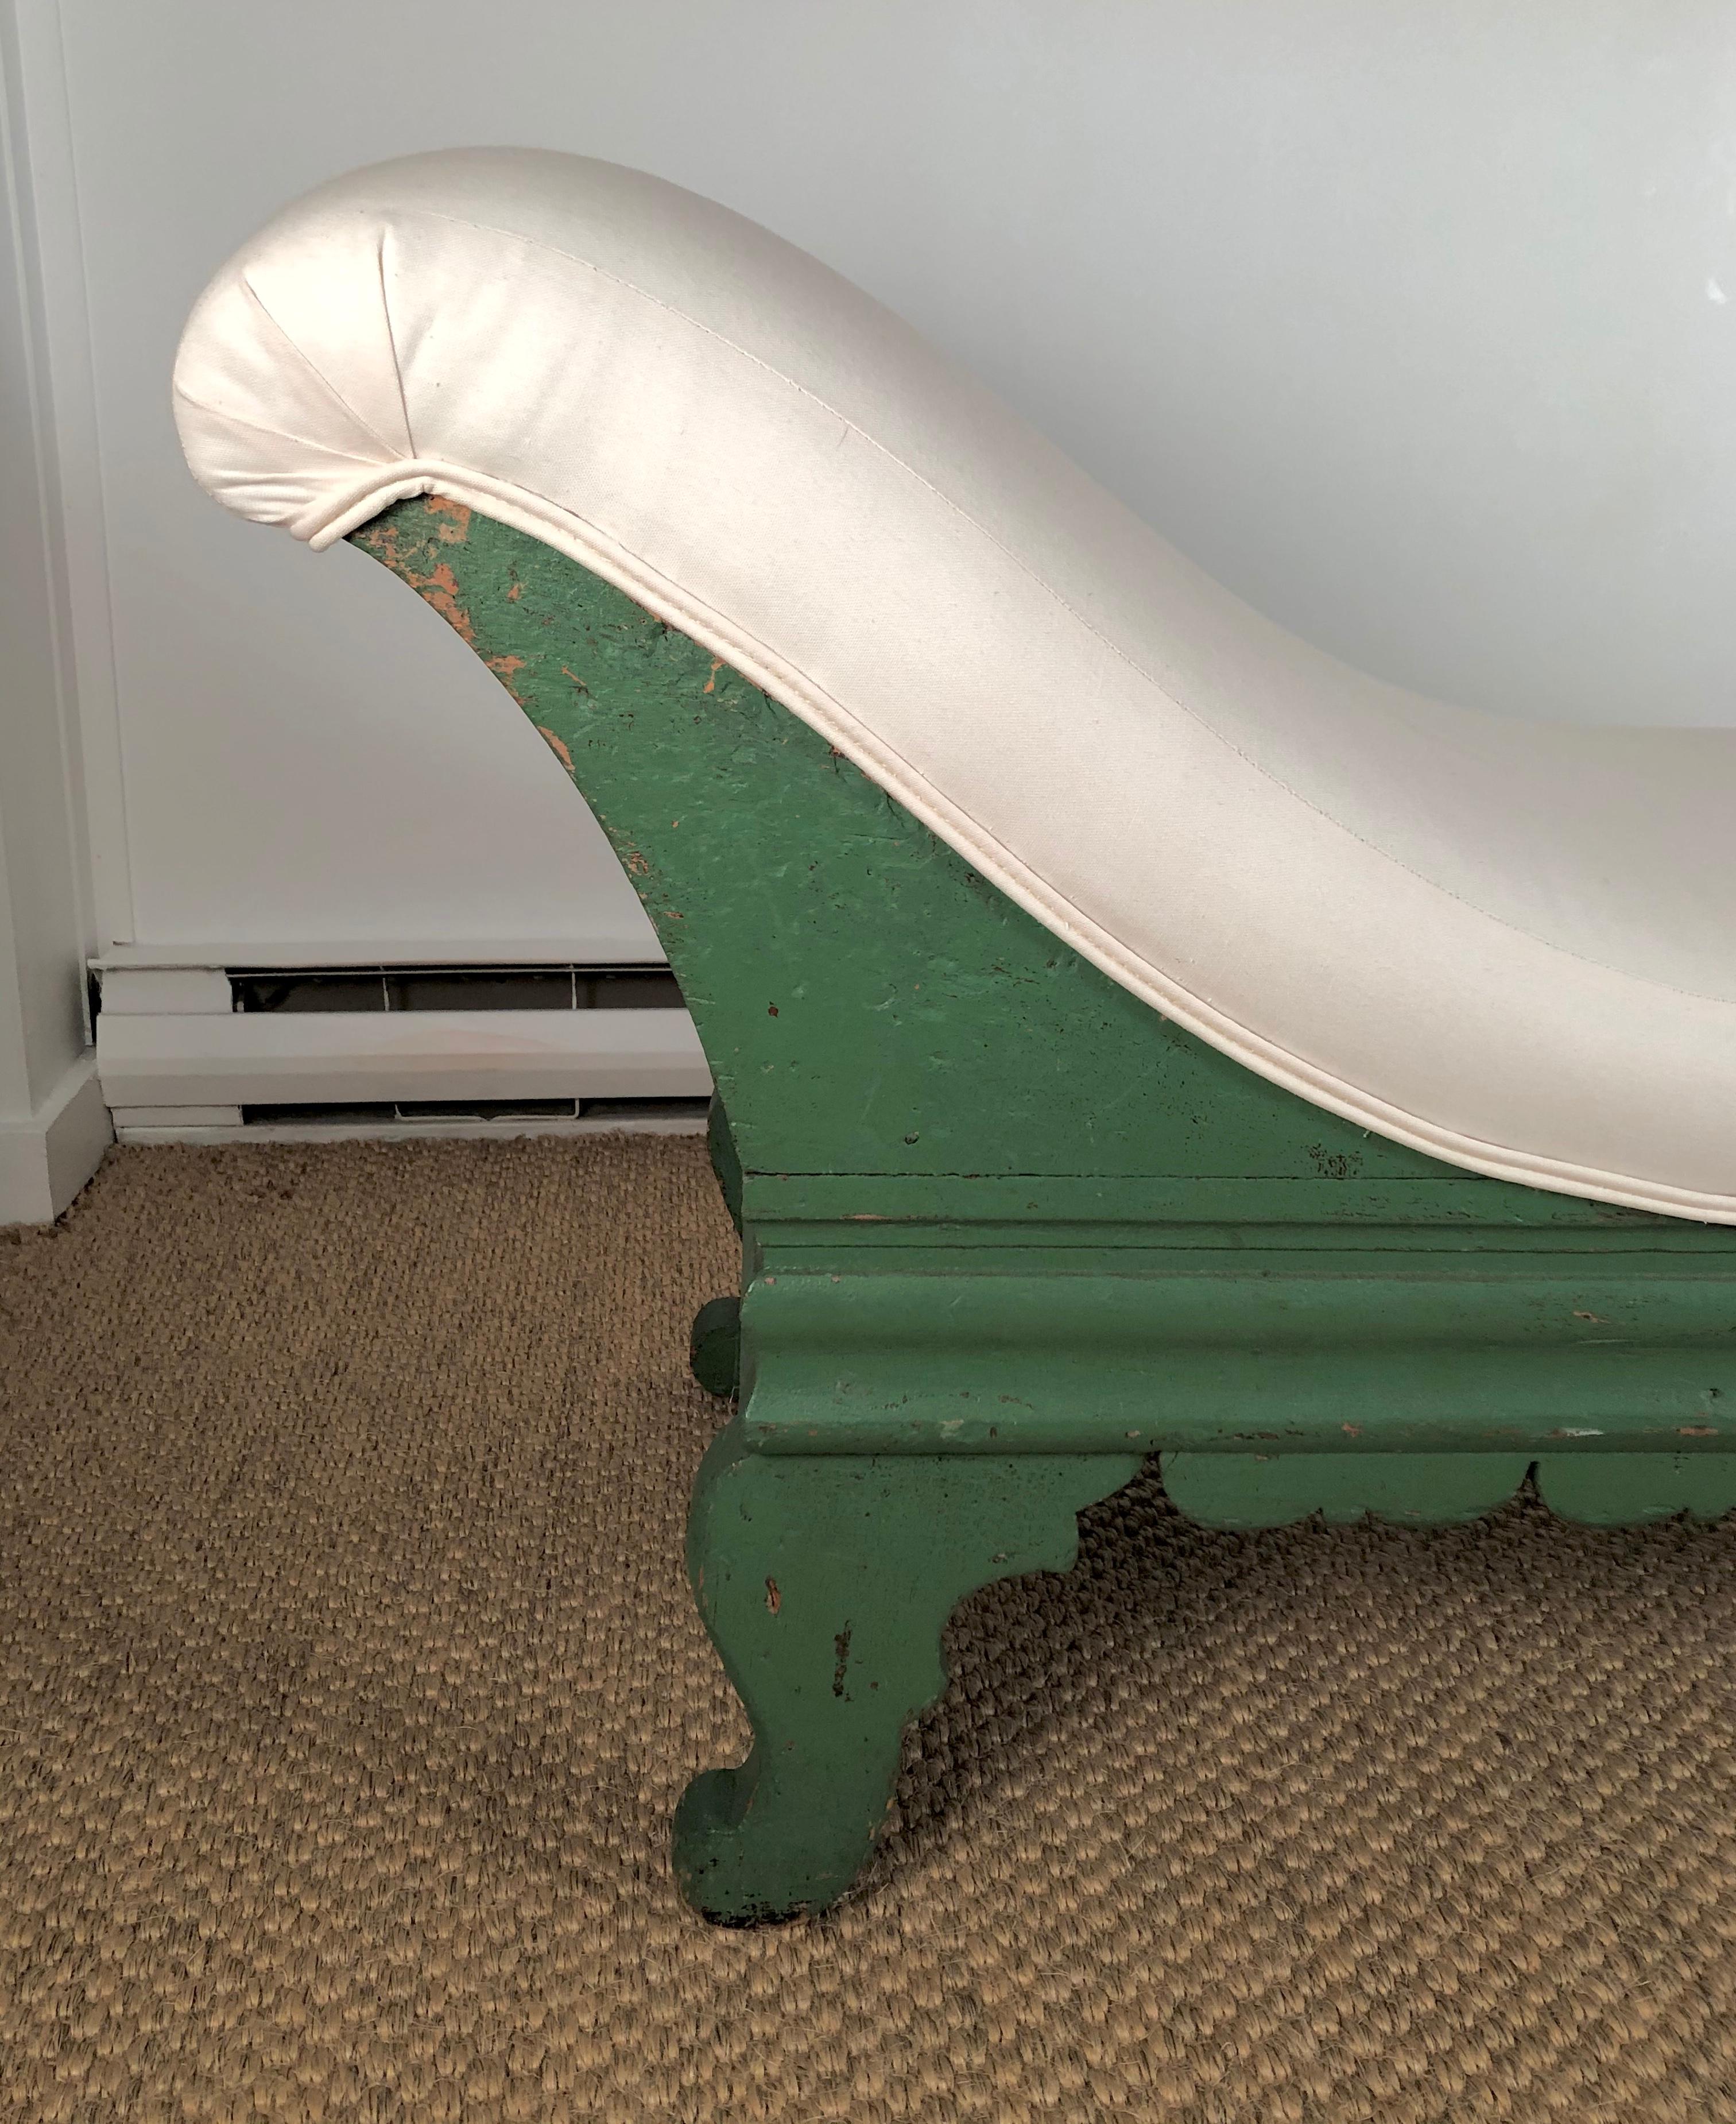 A 19th century American Country green painted and carved wood chaise longue, upholstered in white duck cloth, the frame with carved bracketed decoration along the front edge, with a gently sloped back, and supported by four scrolled feet. Solid and